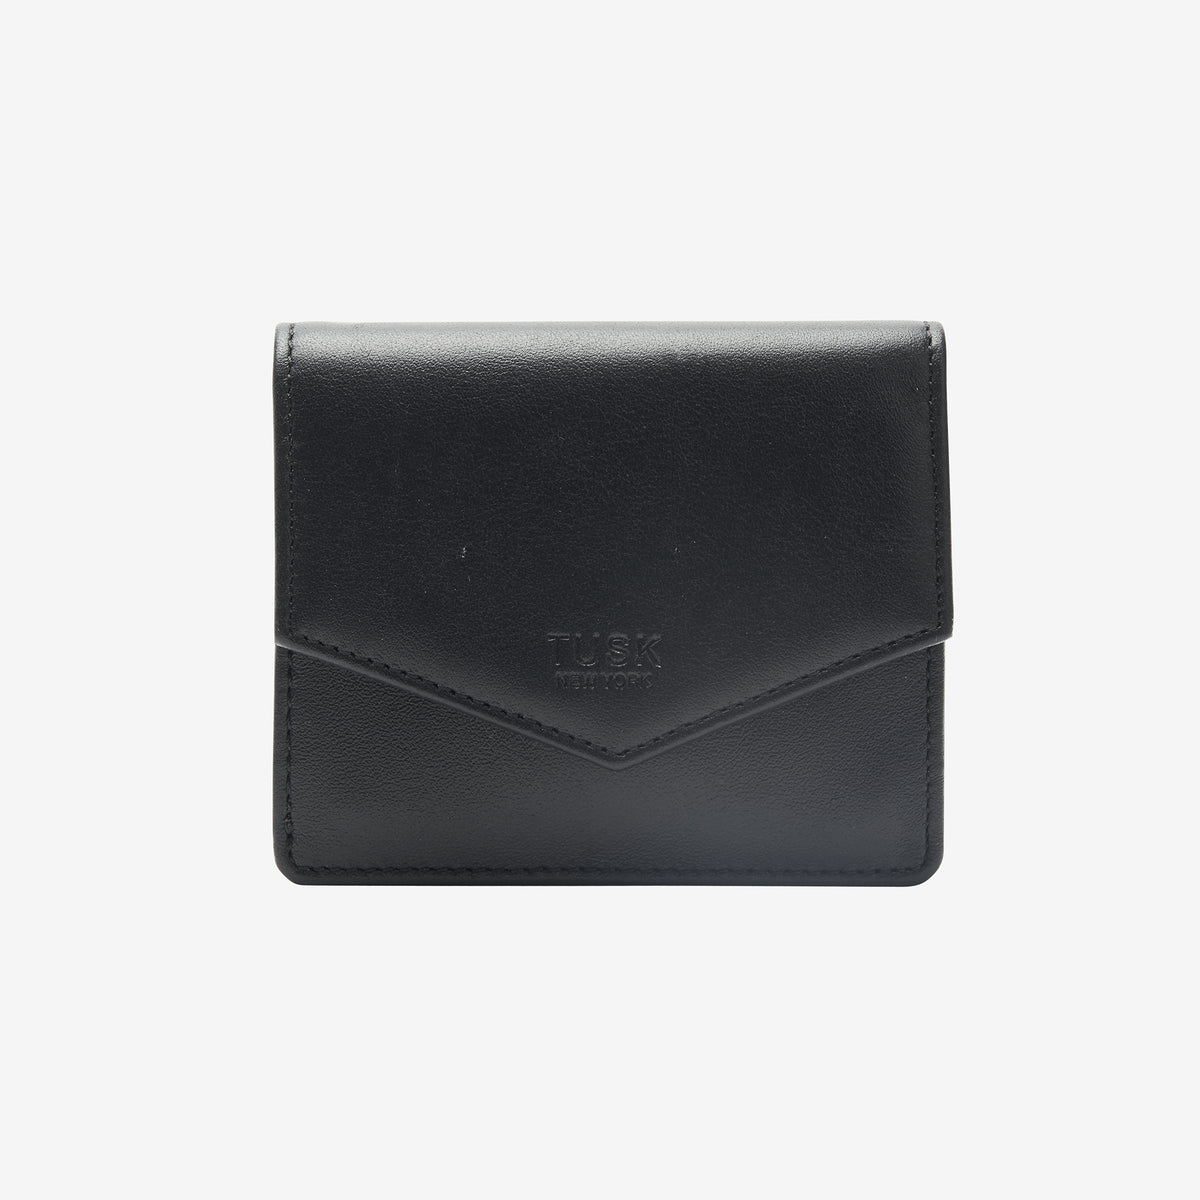 tusk-435-joy-leather-gusseted-french-wallet-black-front